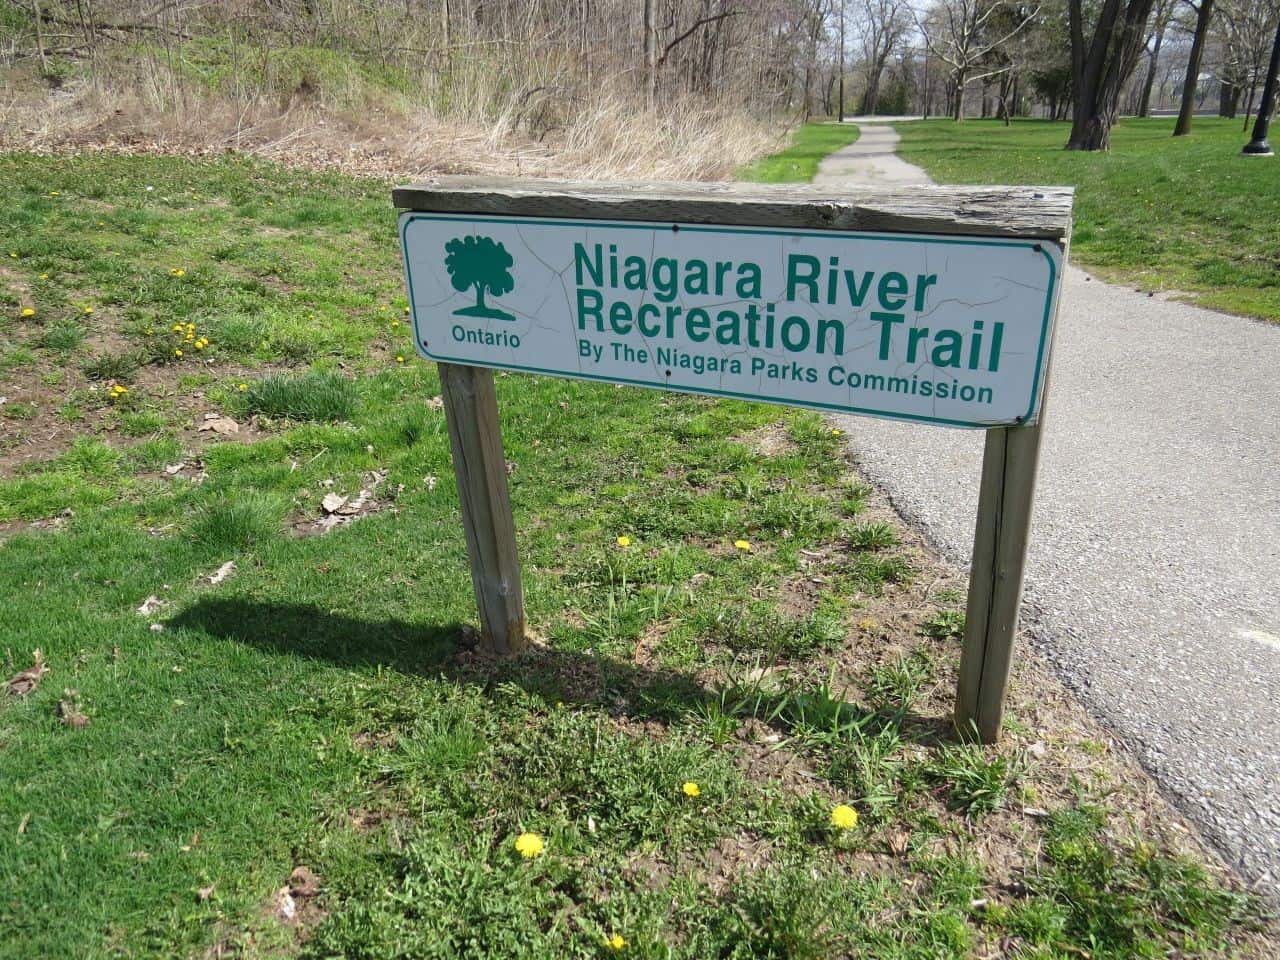 Niagara River Recreation Trail is well signed, hiking and cycling trail in Niagara, Ontario